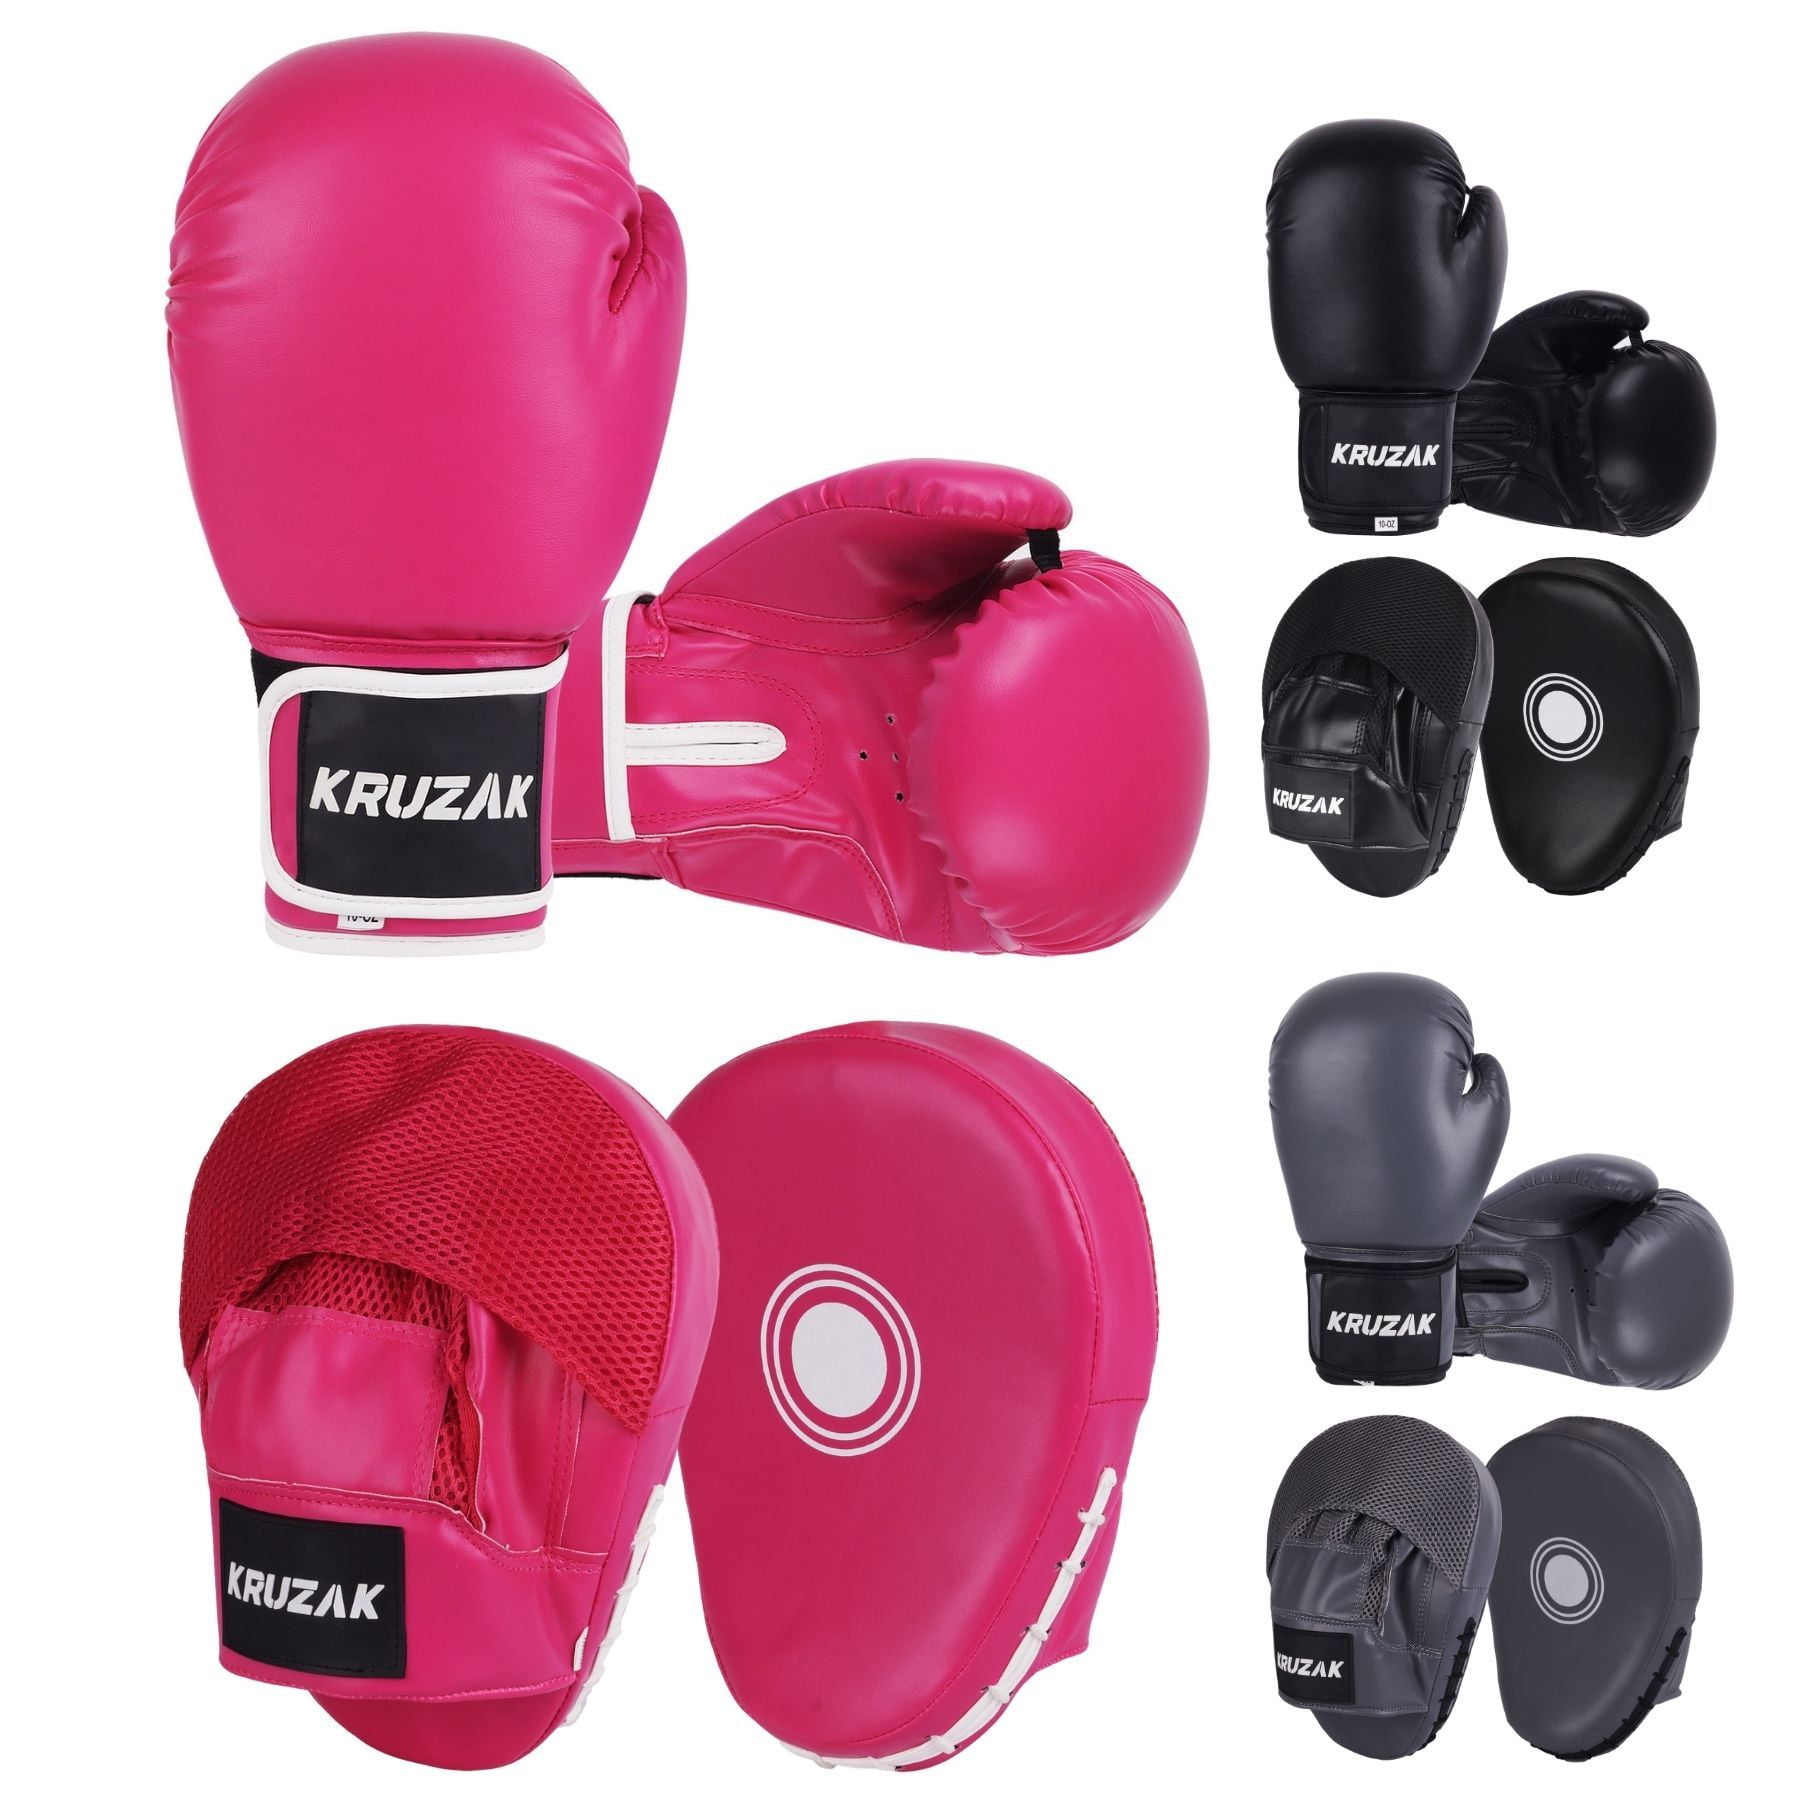 Lions Boxing Gloves and Pads Hook & Jab Mitts Sparring Gloves Set Mma Punch Bag Training Kit